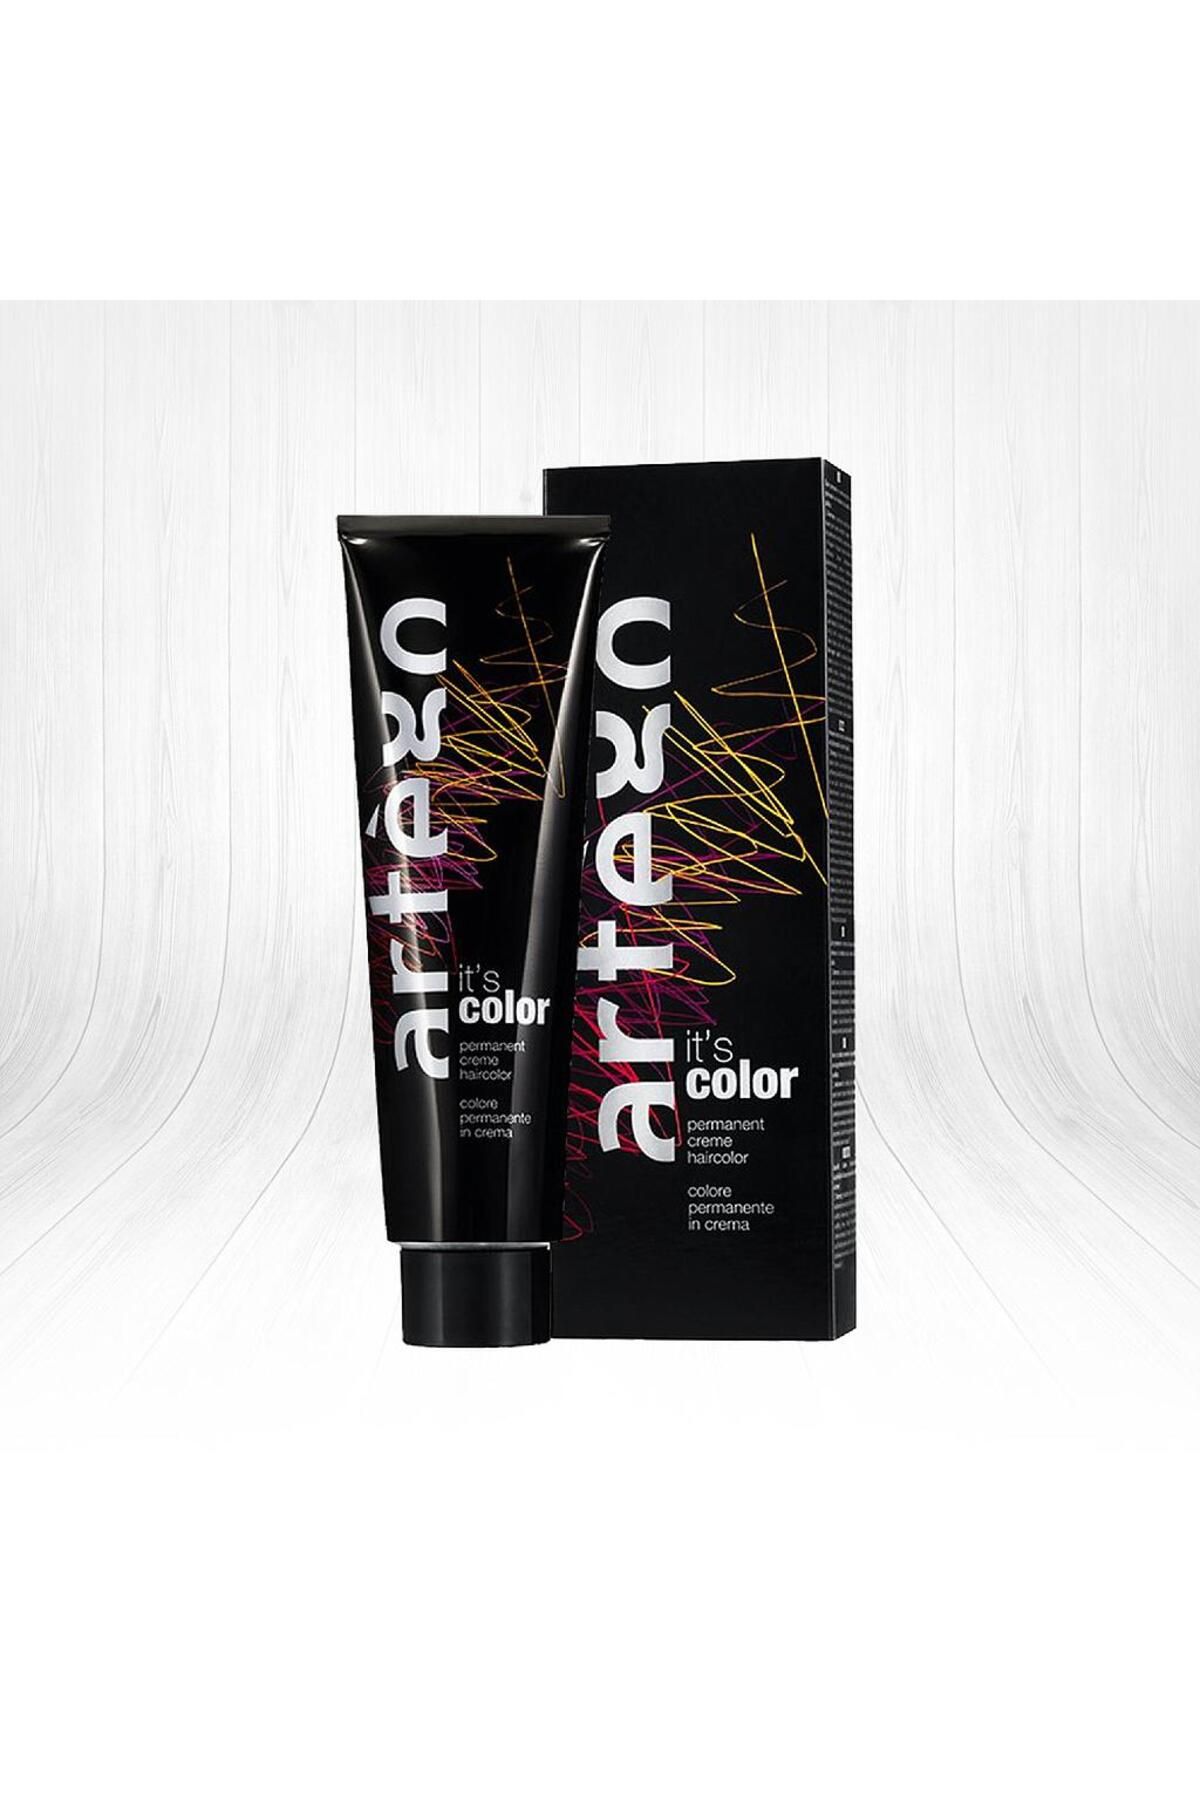 Artego NEW 5.31 IT'S COLOR LIGHT GOLD COLD BROWN 150ML.